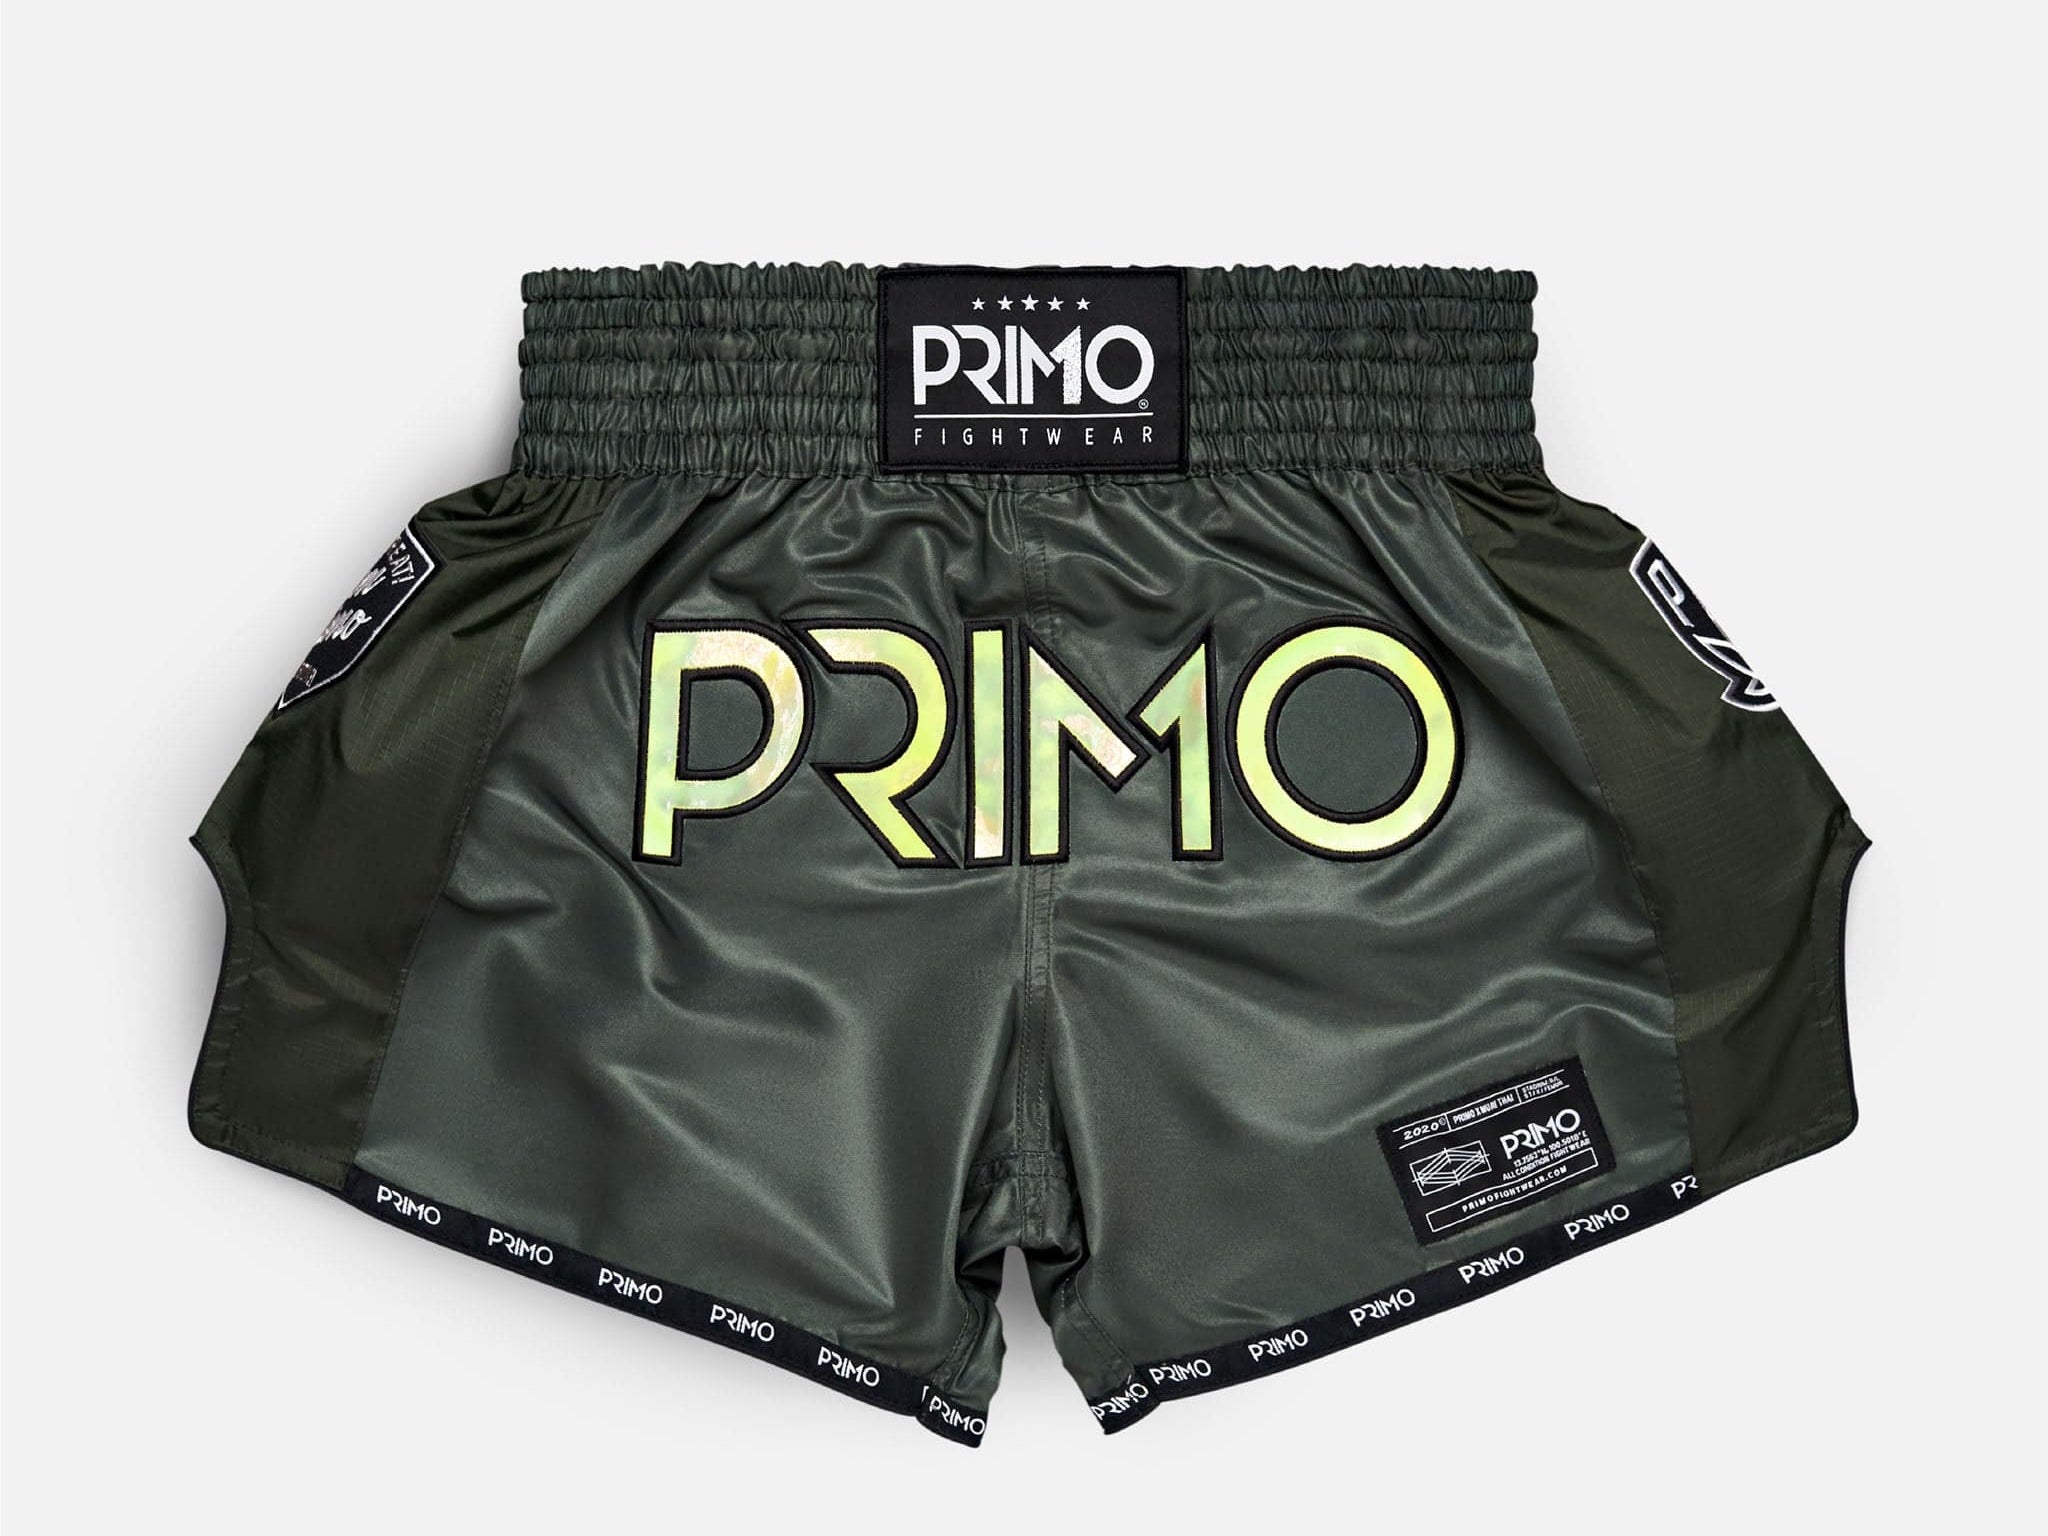 Primo Fight Wear Official Muay Thai Shorts - Hologram Series - Valor Green